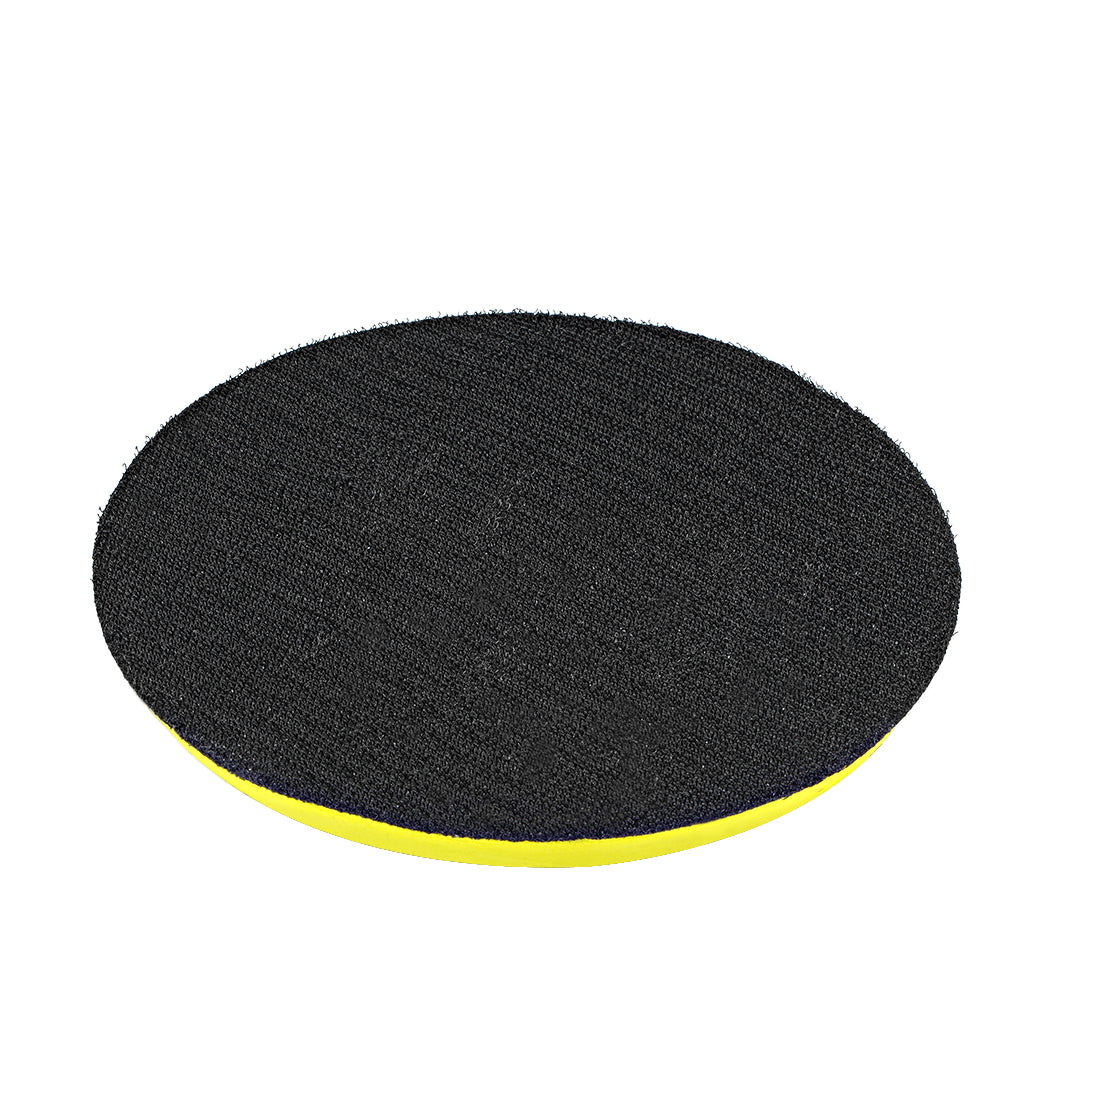 Uxcell Uxcell 6-inch Hook and Loop Backing Pad, Orbital Sander Polisher Polishing Sanding Pad M14 Drill Adapter